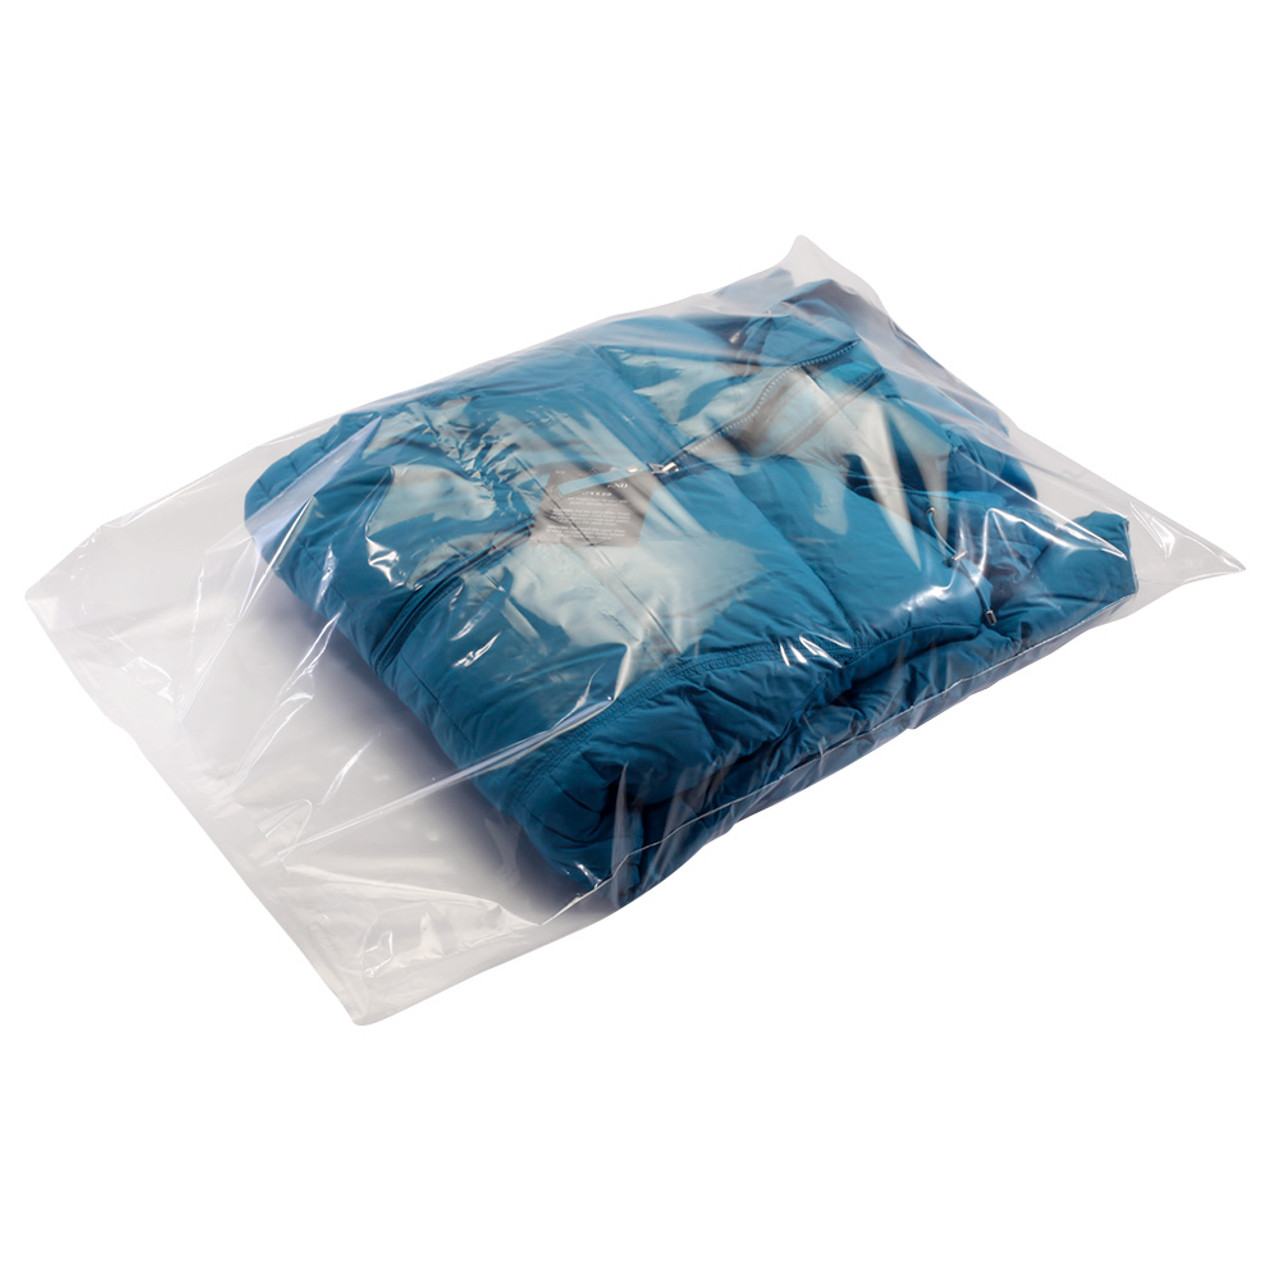 7X7 - 1.5 mil - clear - layflat poly bags - 1000 bags/case